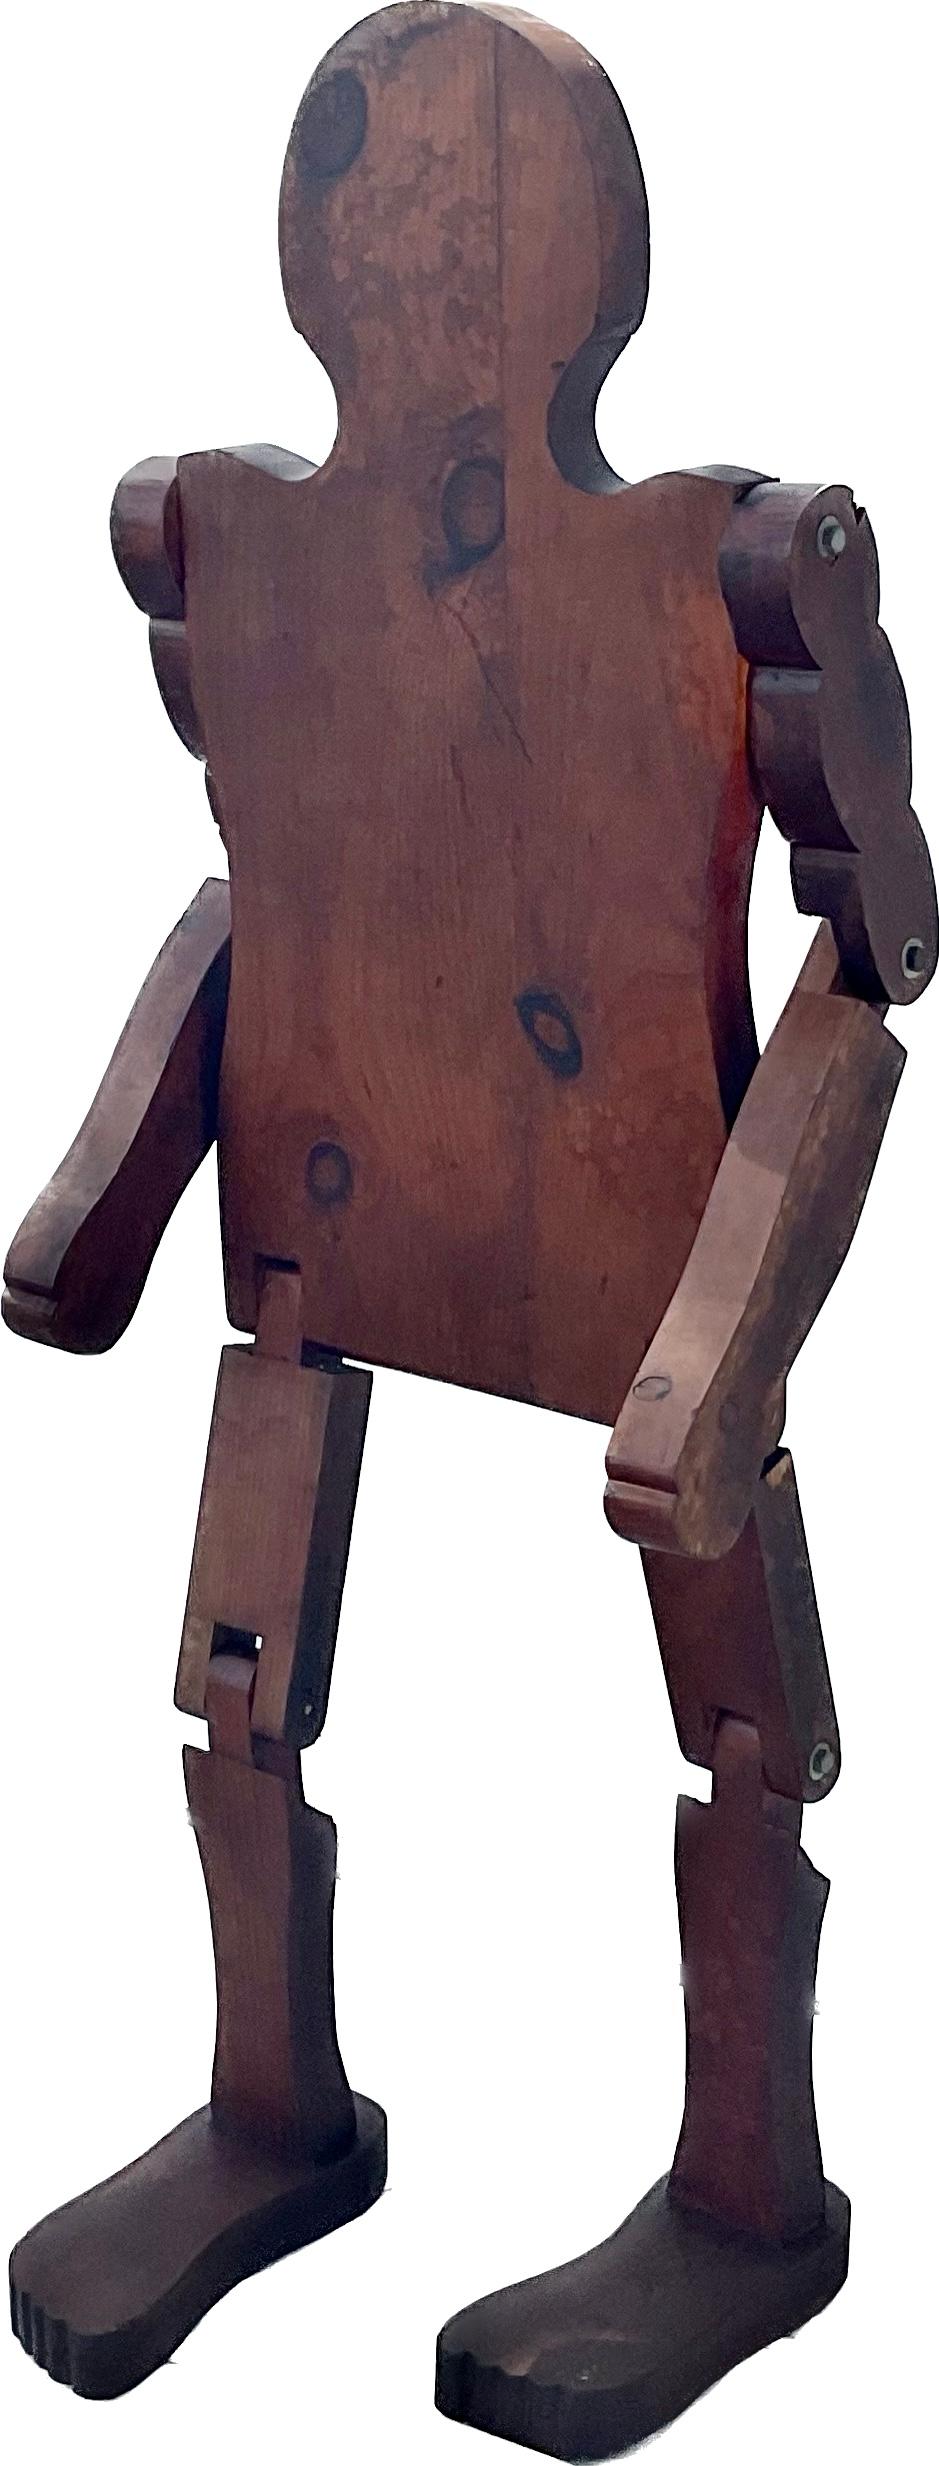 Mid-century wooden, hand-carved articulated mannequin folk art sculpture in a child size. Arms, hands, legs, and feet are articulated. A rare whimsical and fun work of art for any interior, will look great in any style homes.